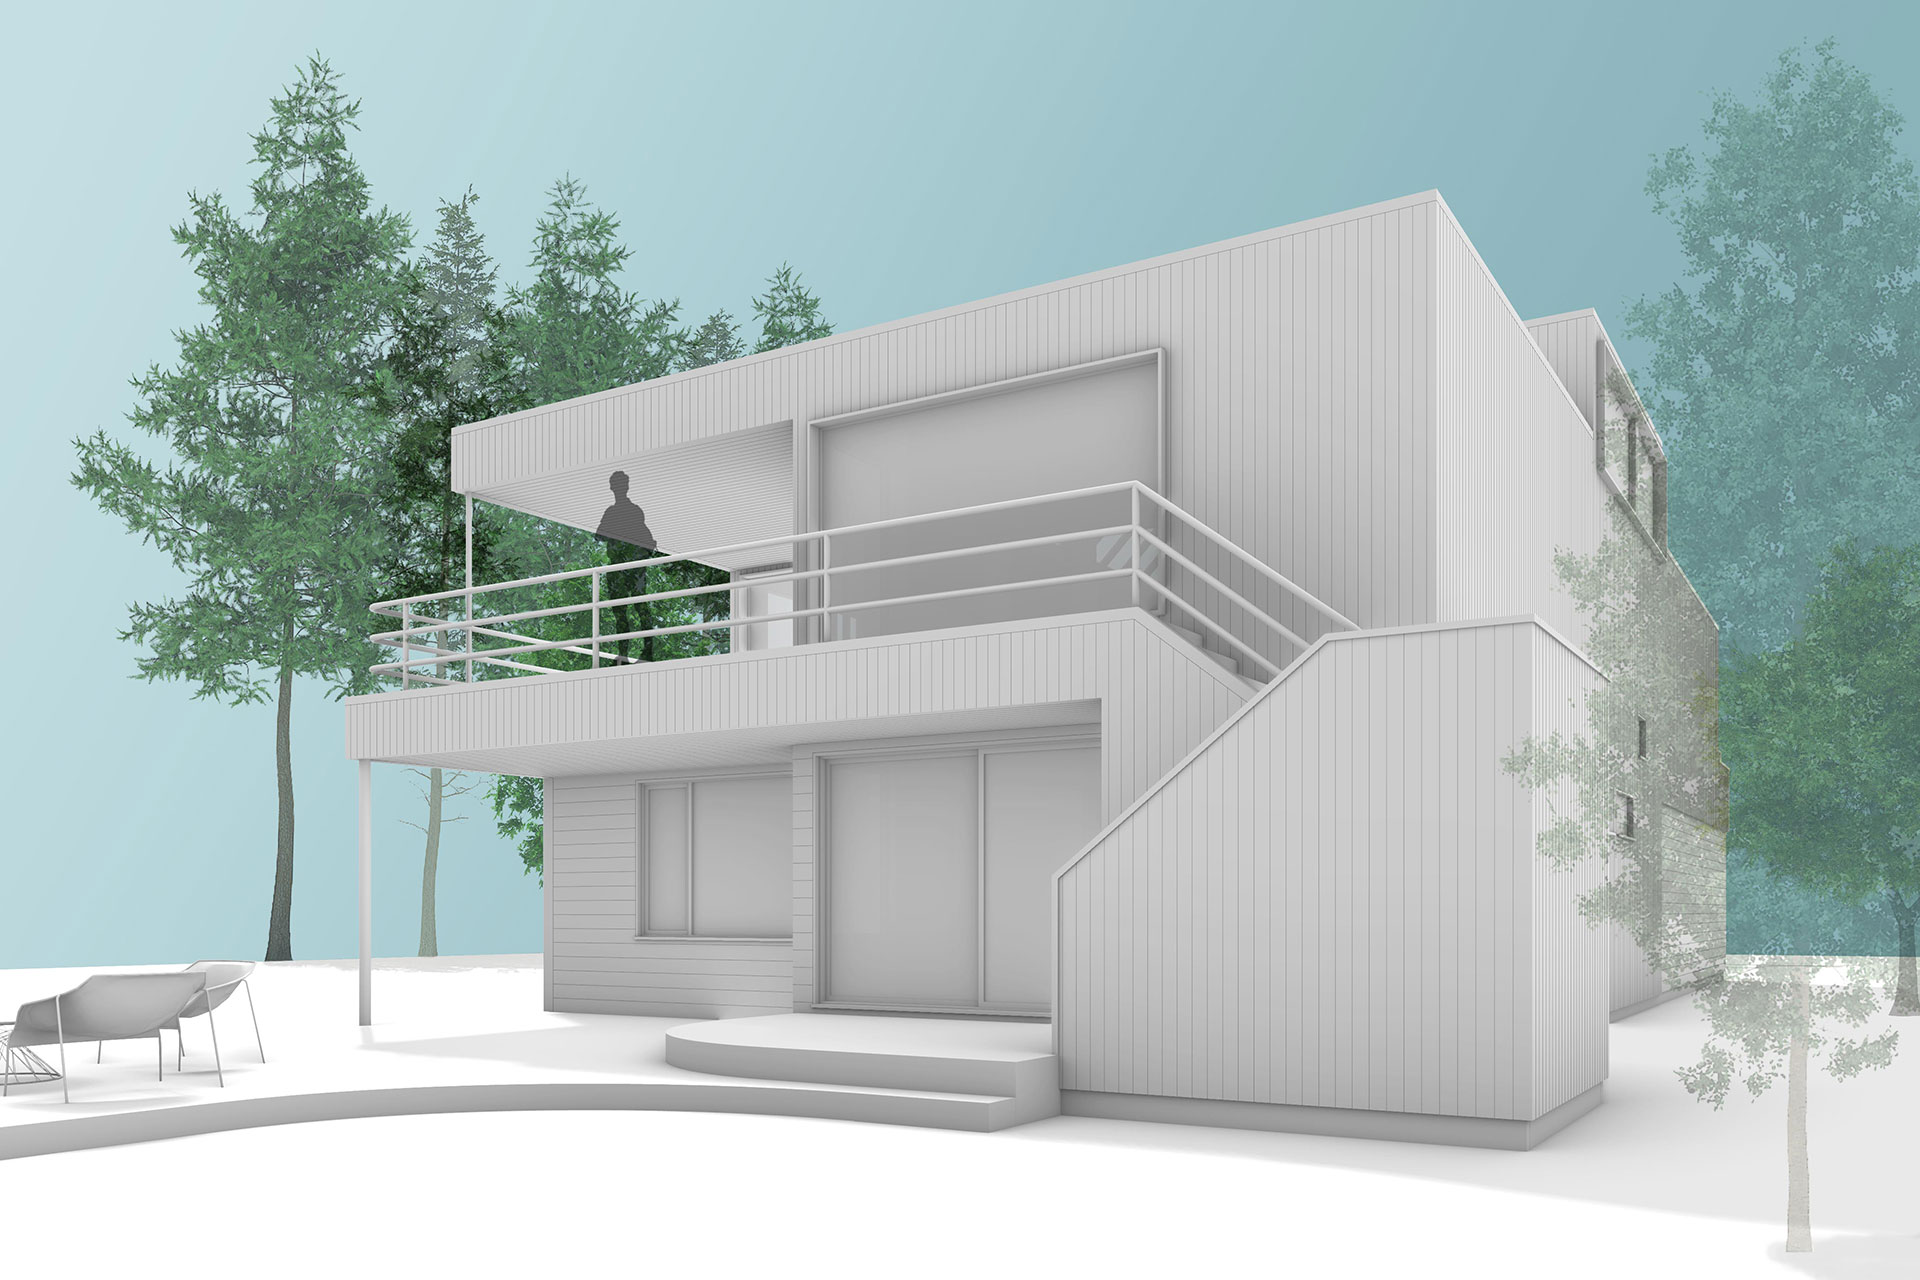 This is a 3d rendering of the rear of the home showing the proposed exterior remodel.